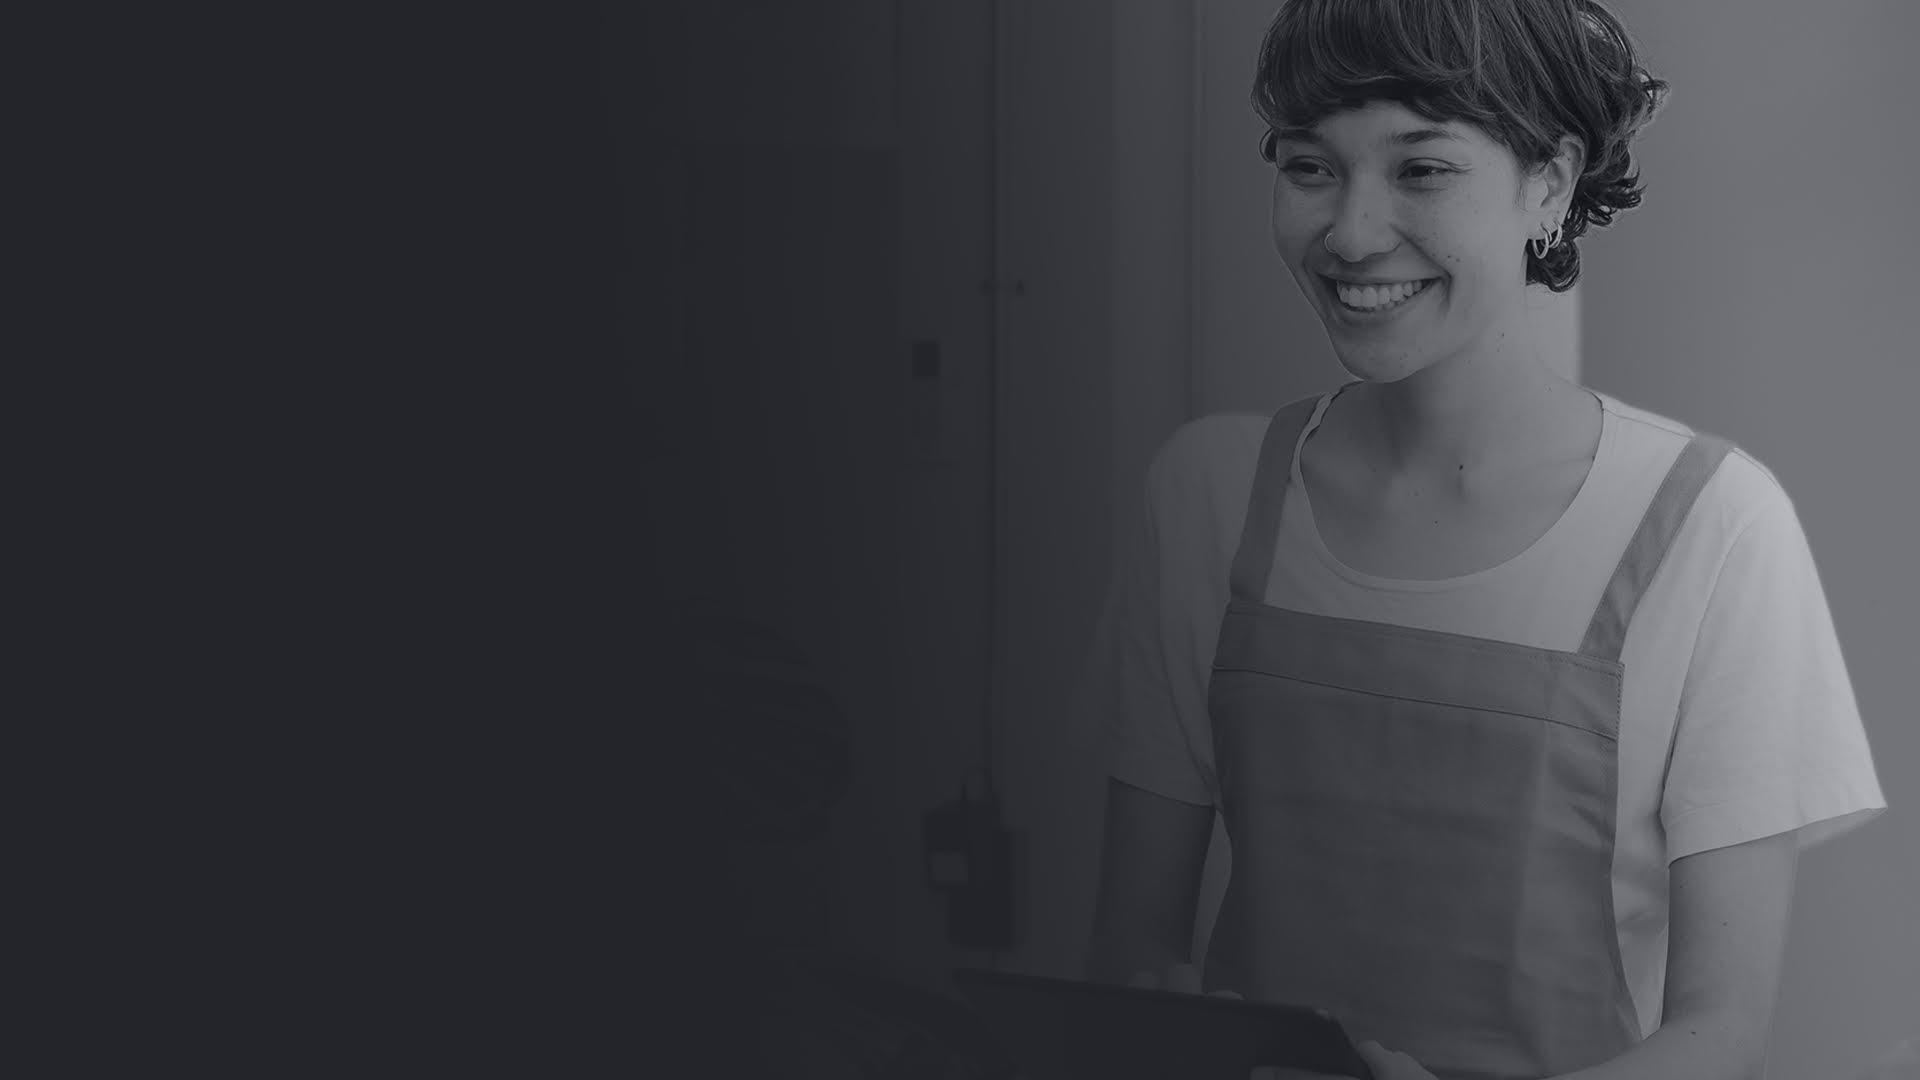 Female professional smiling wearing an apron and holding a clipboard